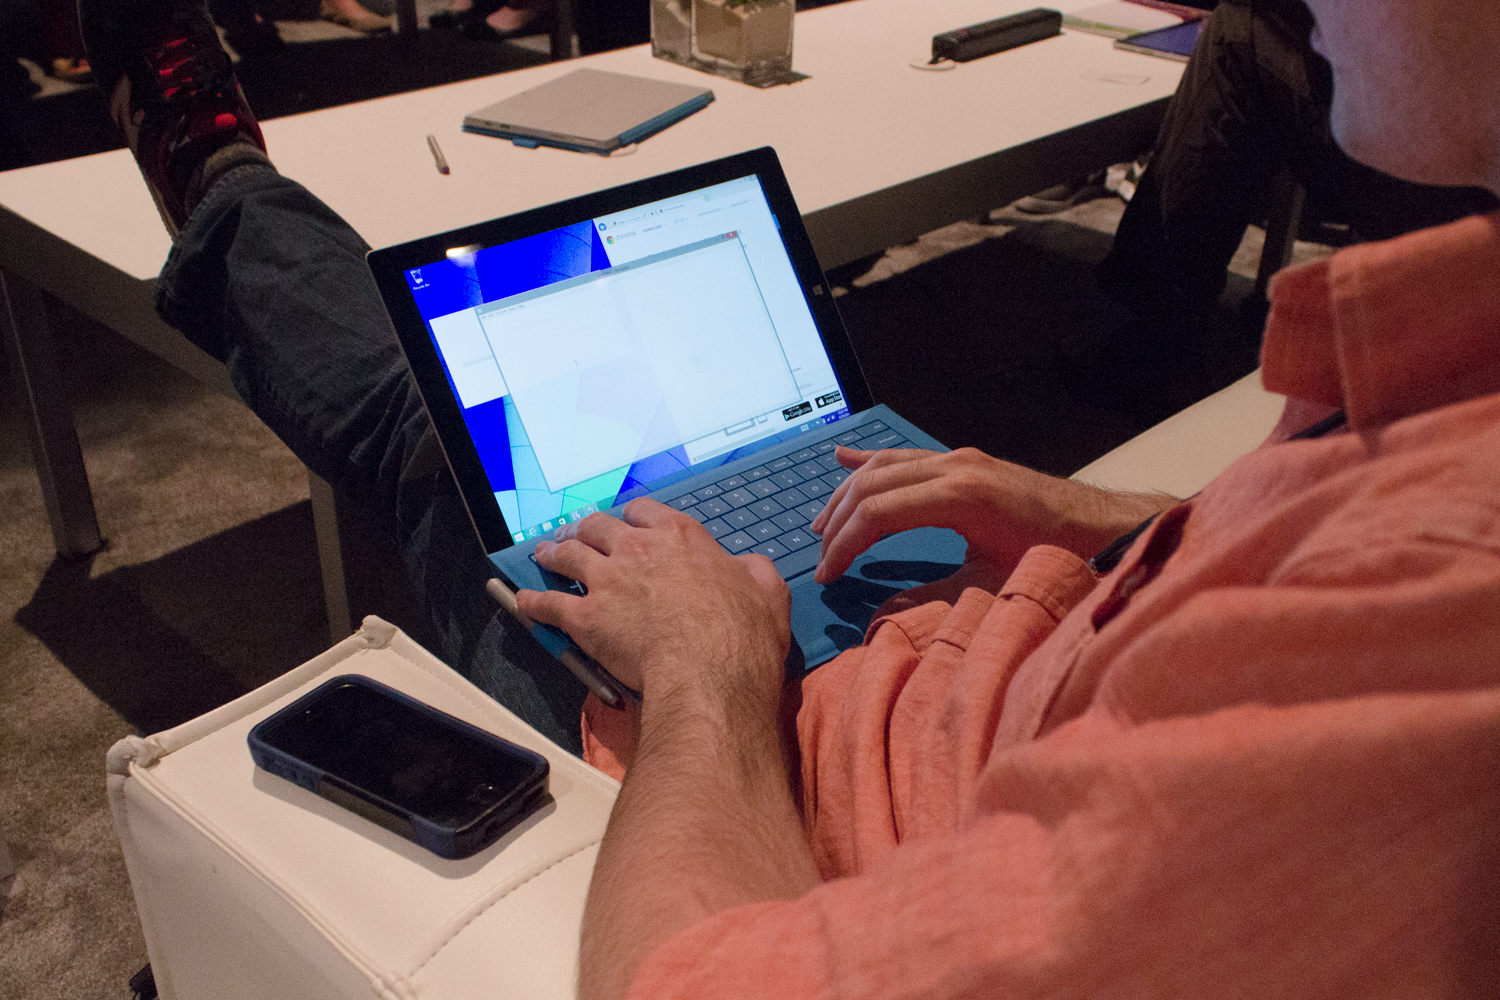  Microsofts Surface Pro 3 as a laptopon my lap Ars Technica